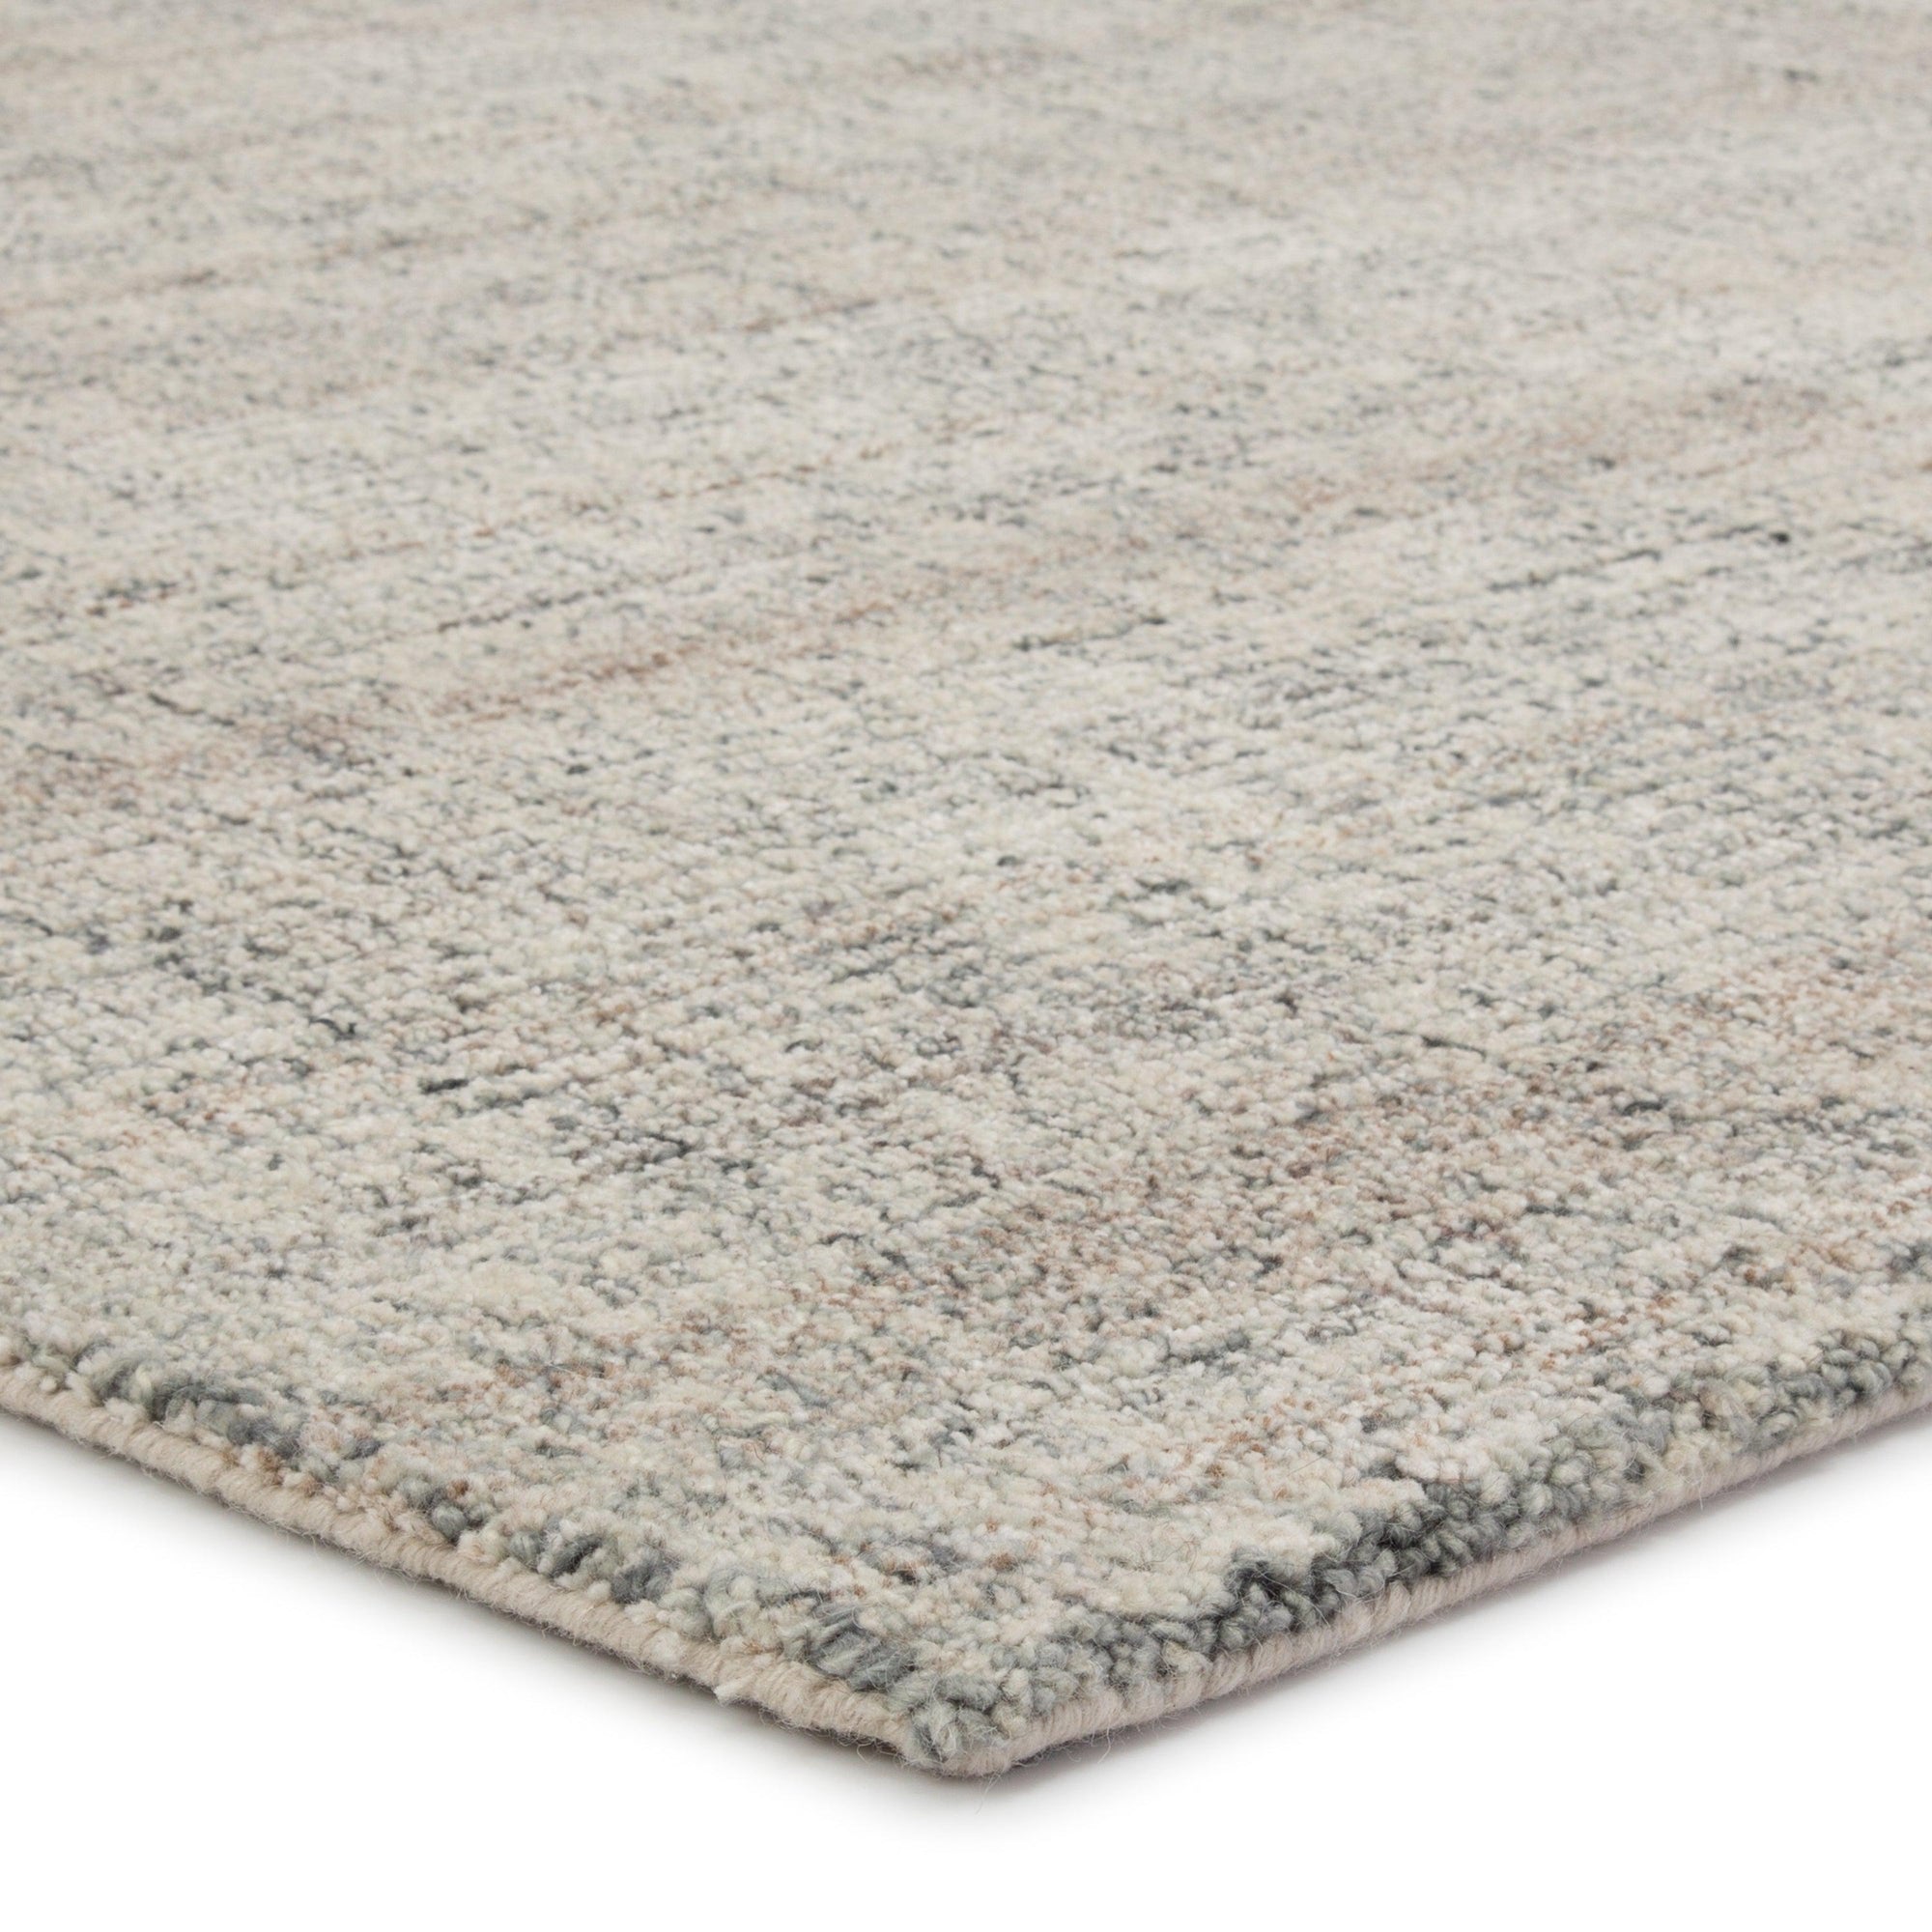 Rugs by Roo | Jaipur Living Ritz Handmade Solid Gray Ivory Area Rug-RUG140343